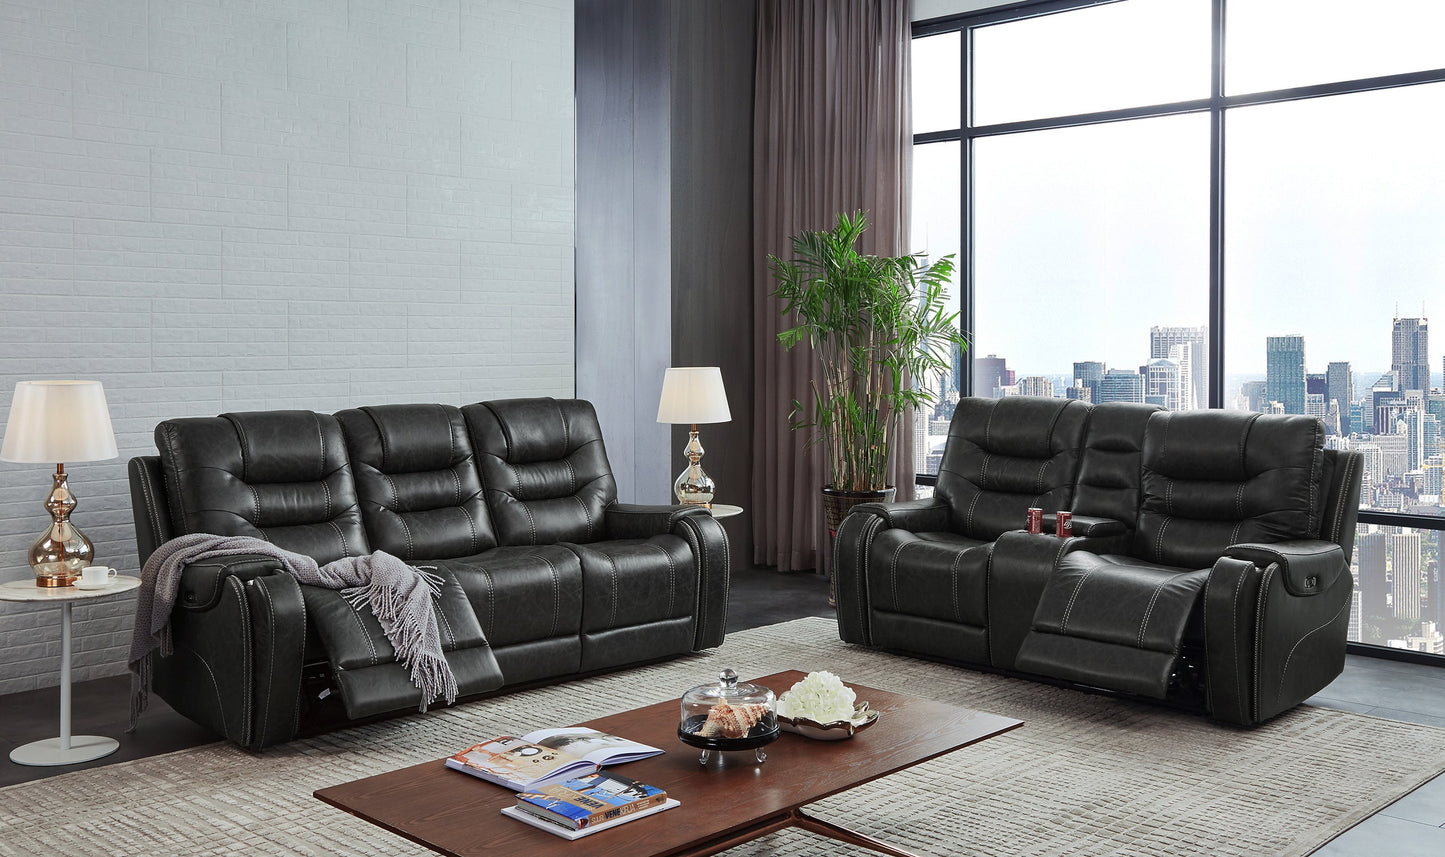 Rowena Contemporary Faux Leather Reclining Living Room Collection, Smoke